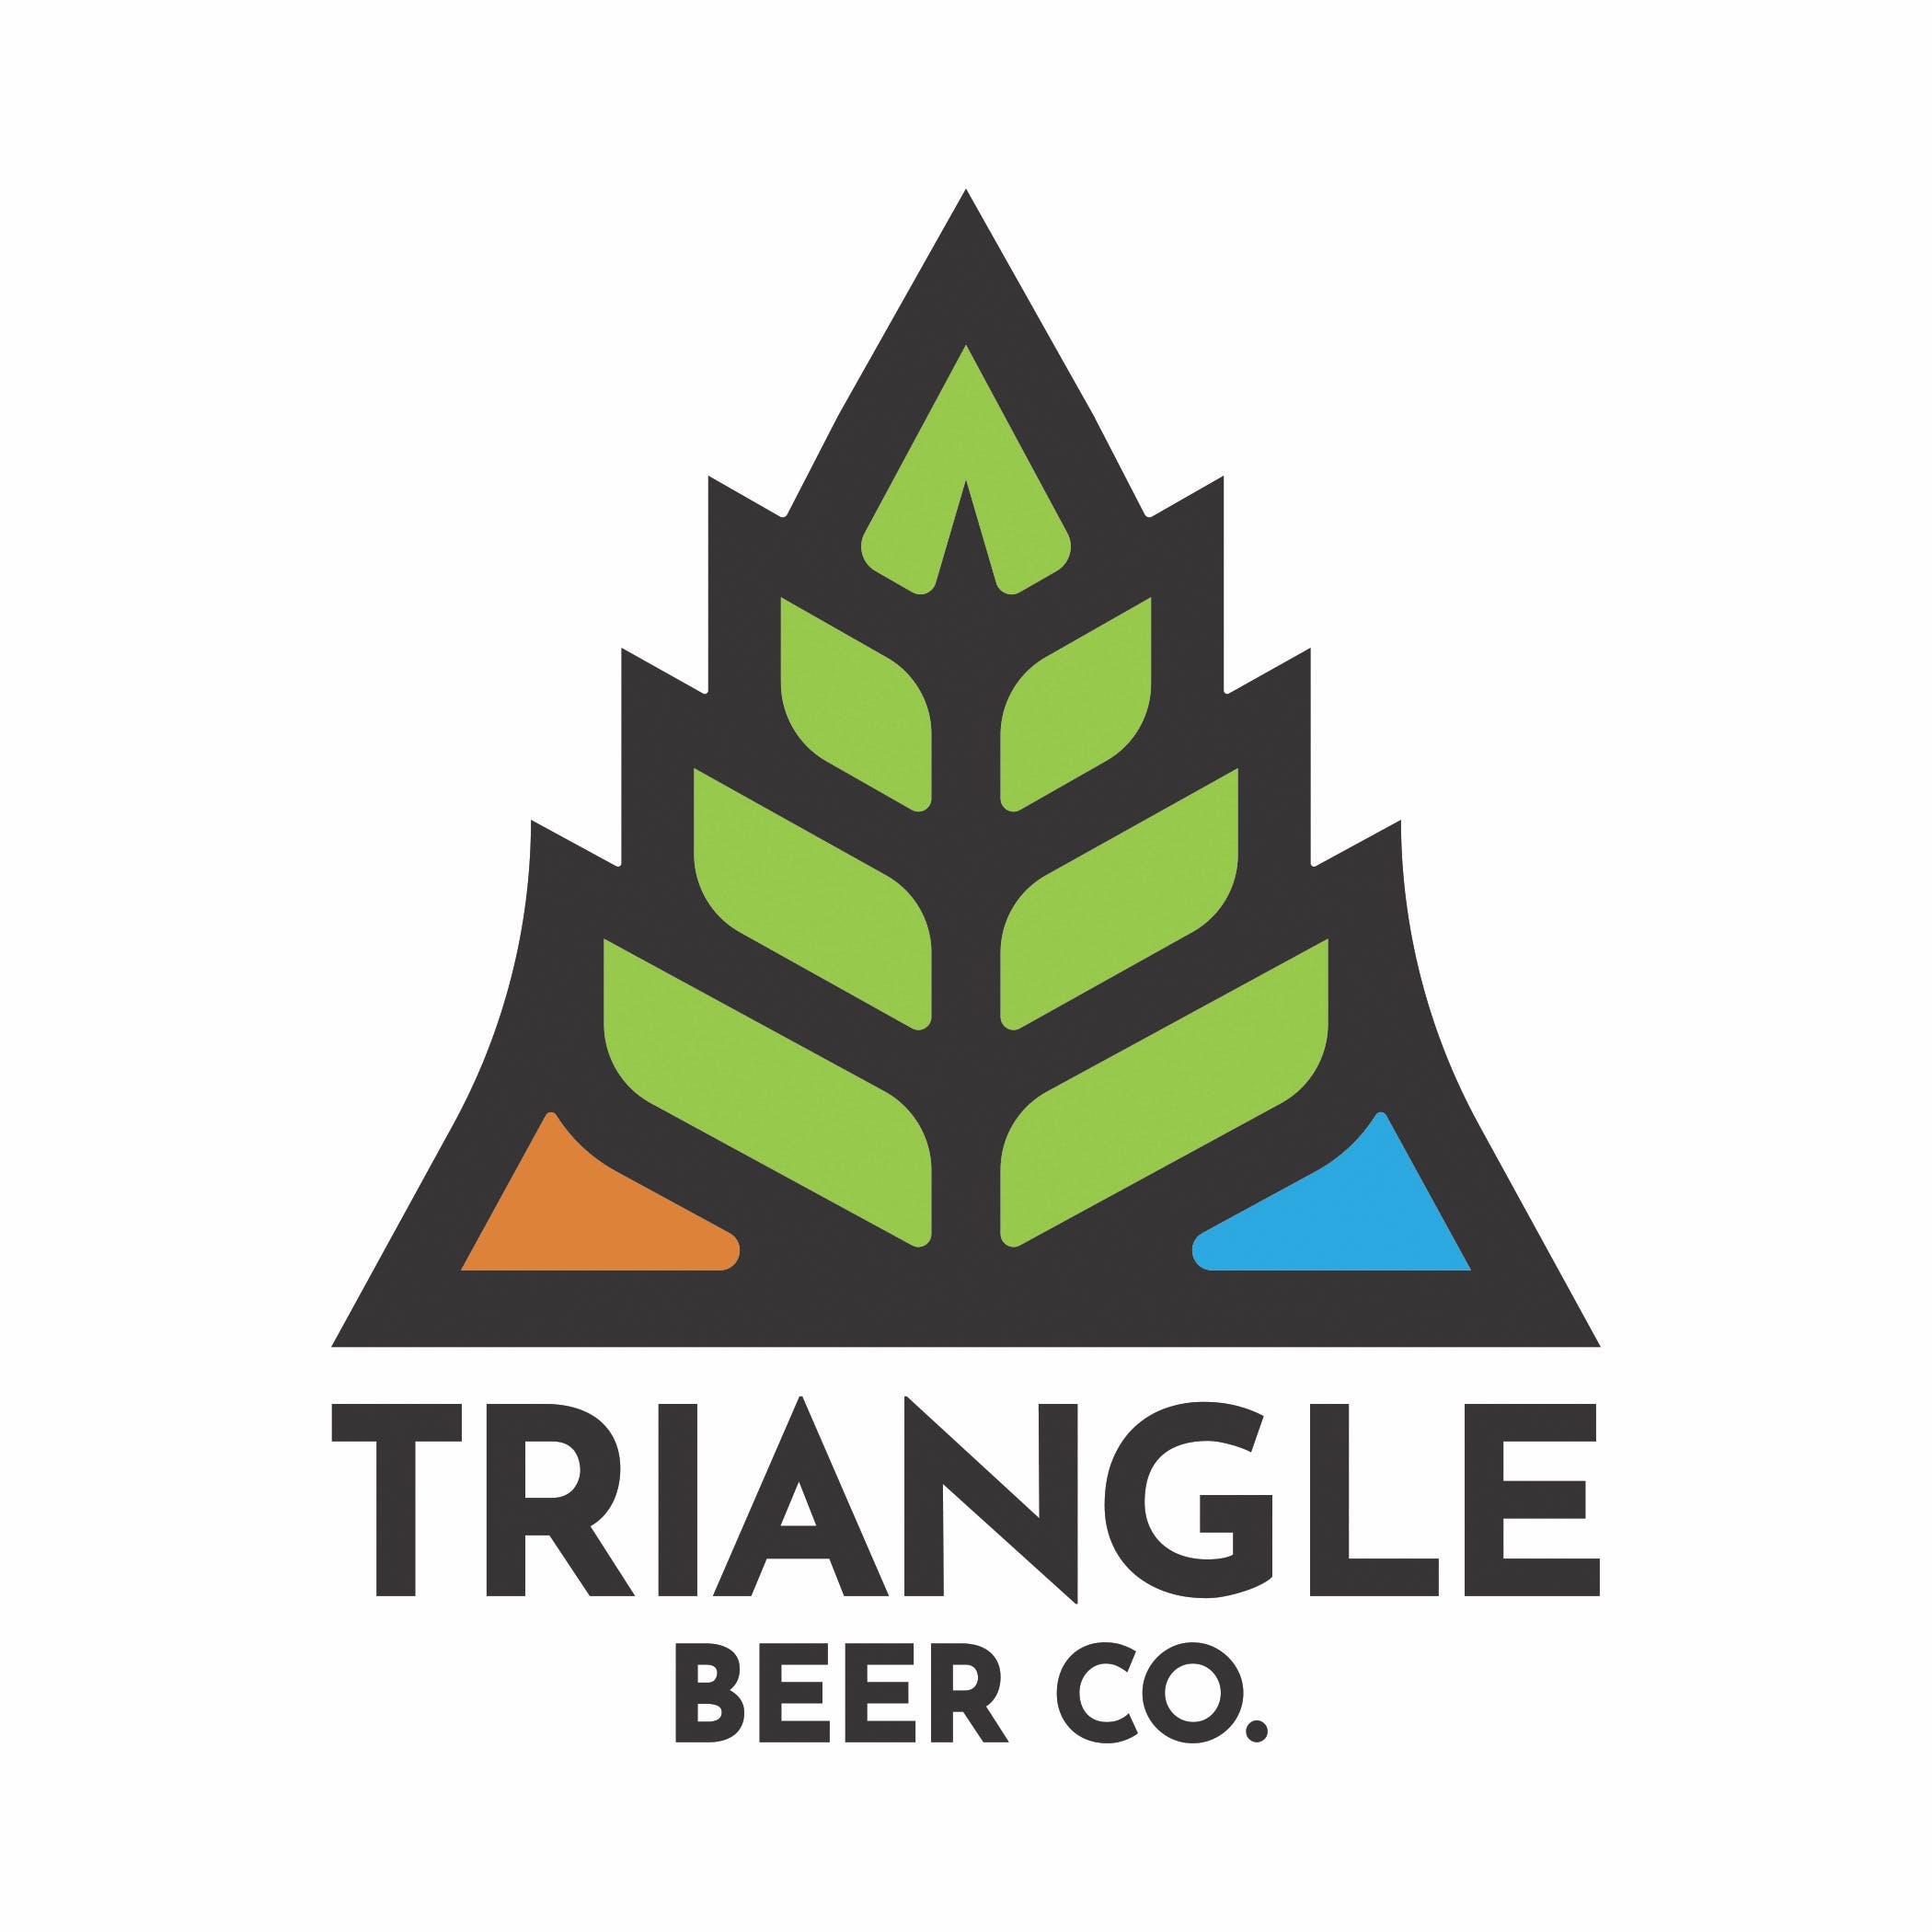 Triangle Beer Co